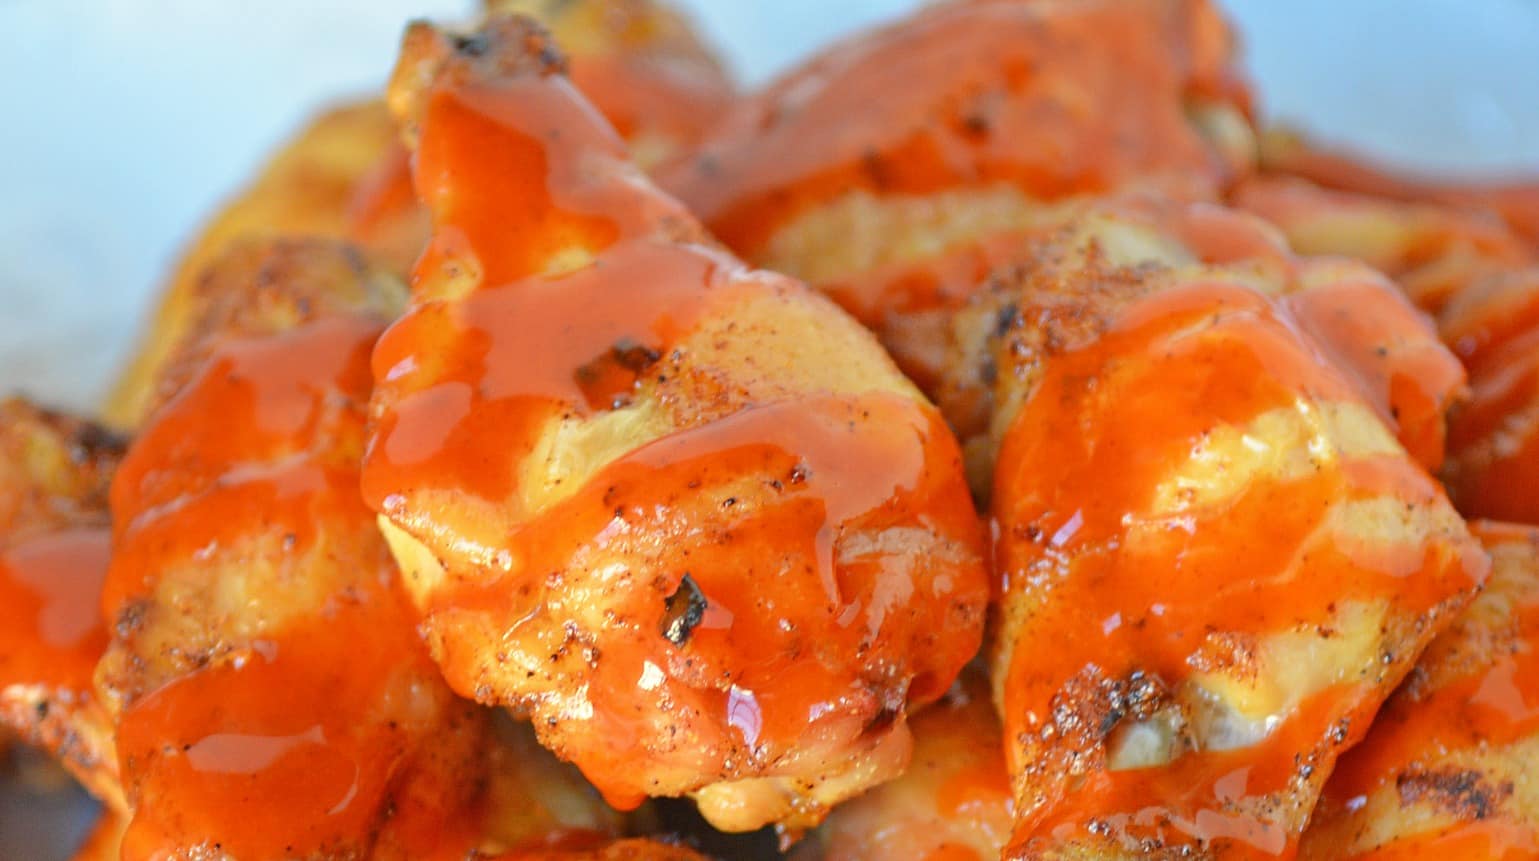 Crispy Baked Buffalo Wings are easier to make than you think. Only 5 ingredients, a simple buffalo sauce and the trick for seriously crispy wings! #bakedbuffalowings www.savoryexperiments.com 